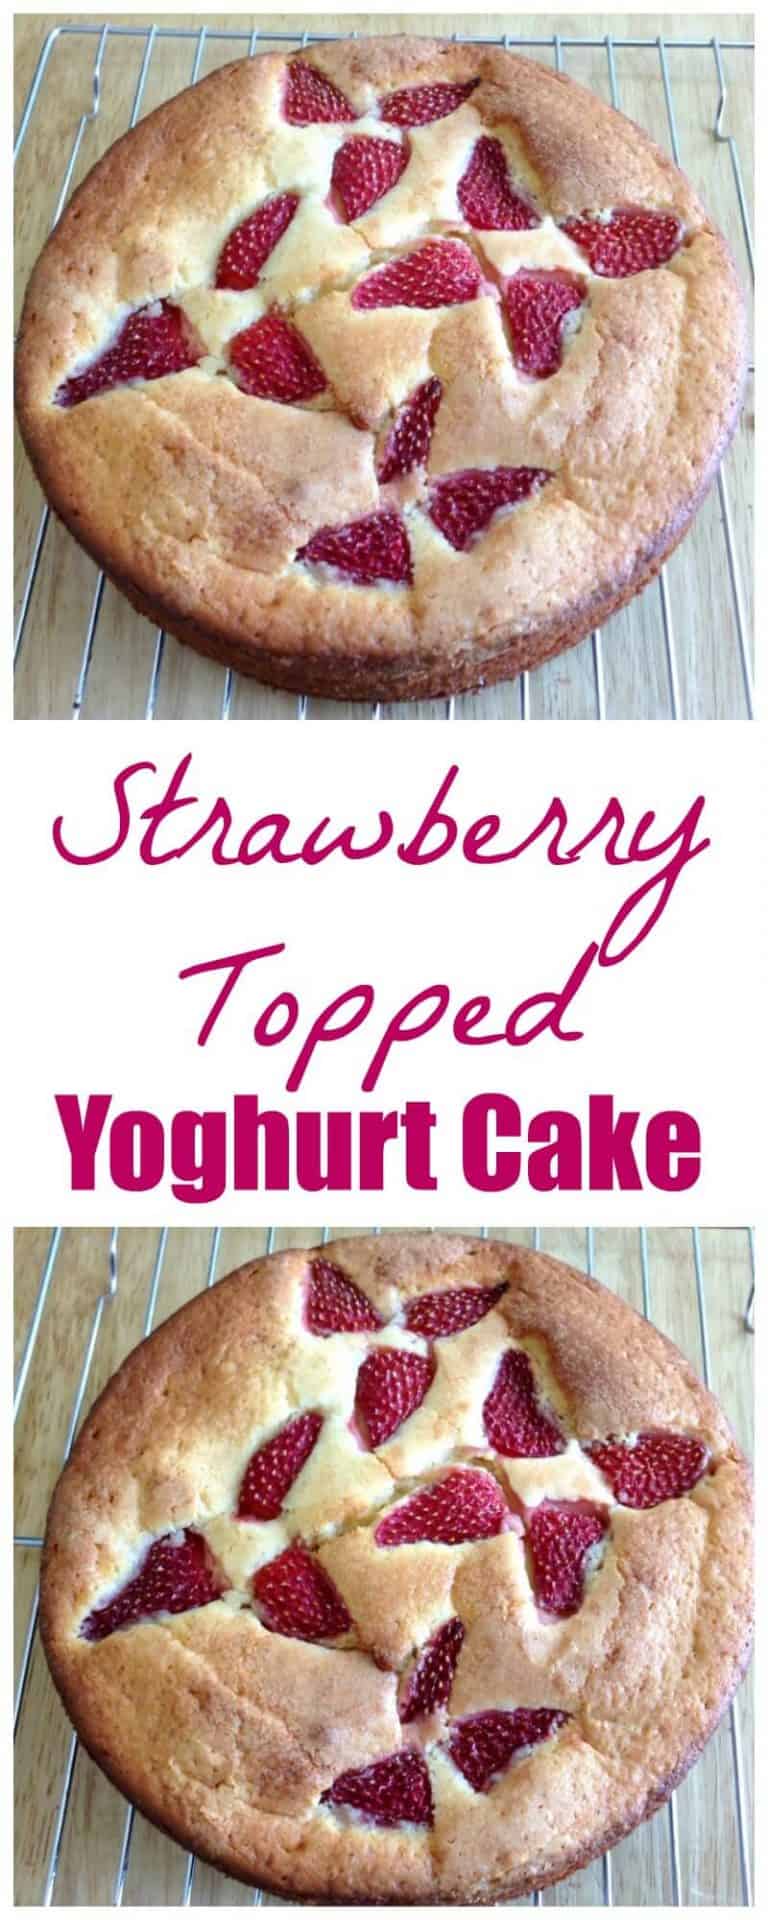 Strawberry Yoghurt Cake - ideal for spring and summer - BakingQueen74